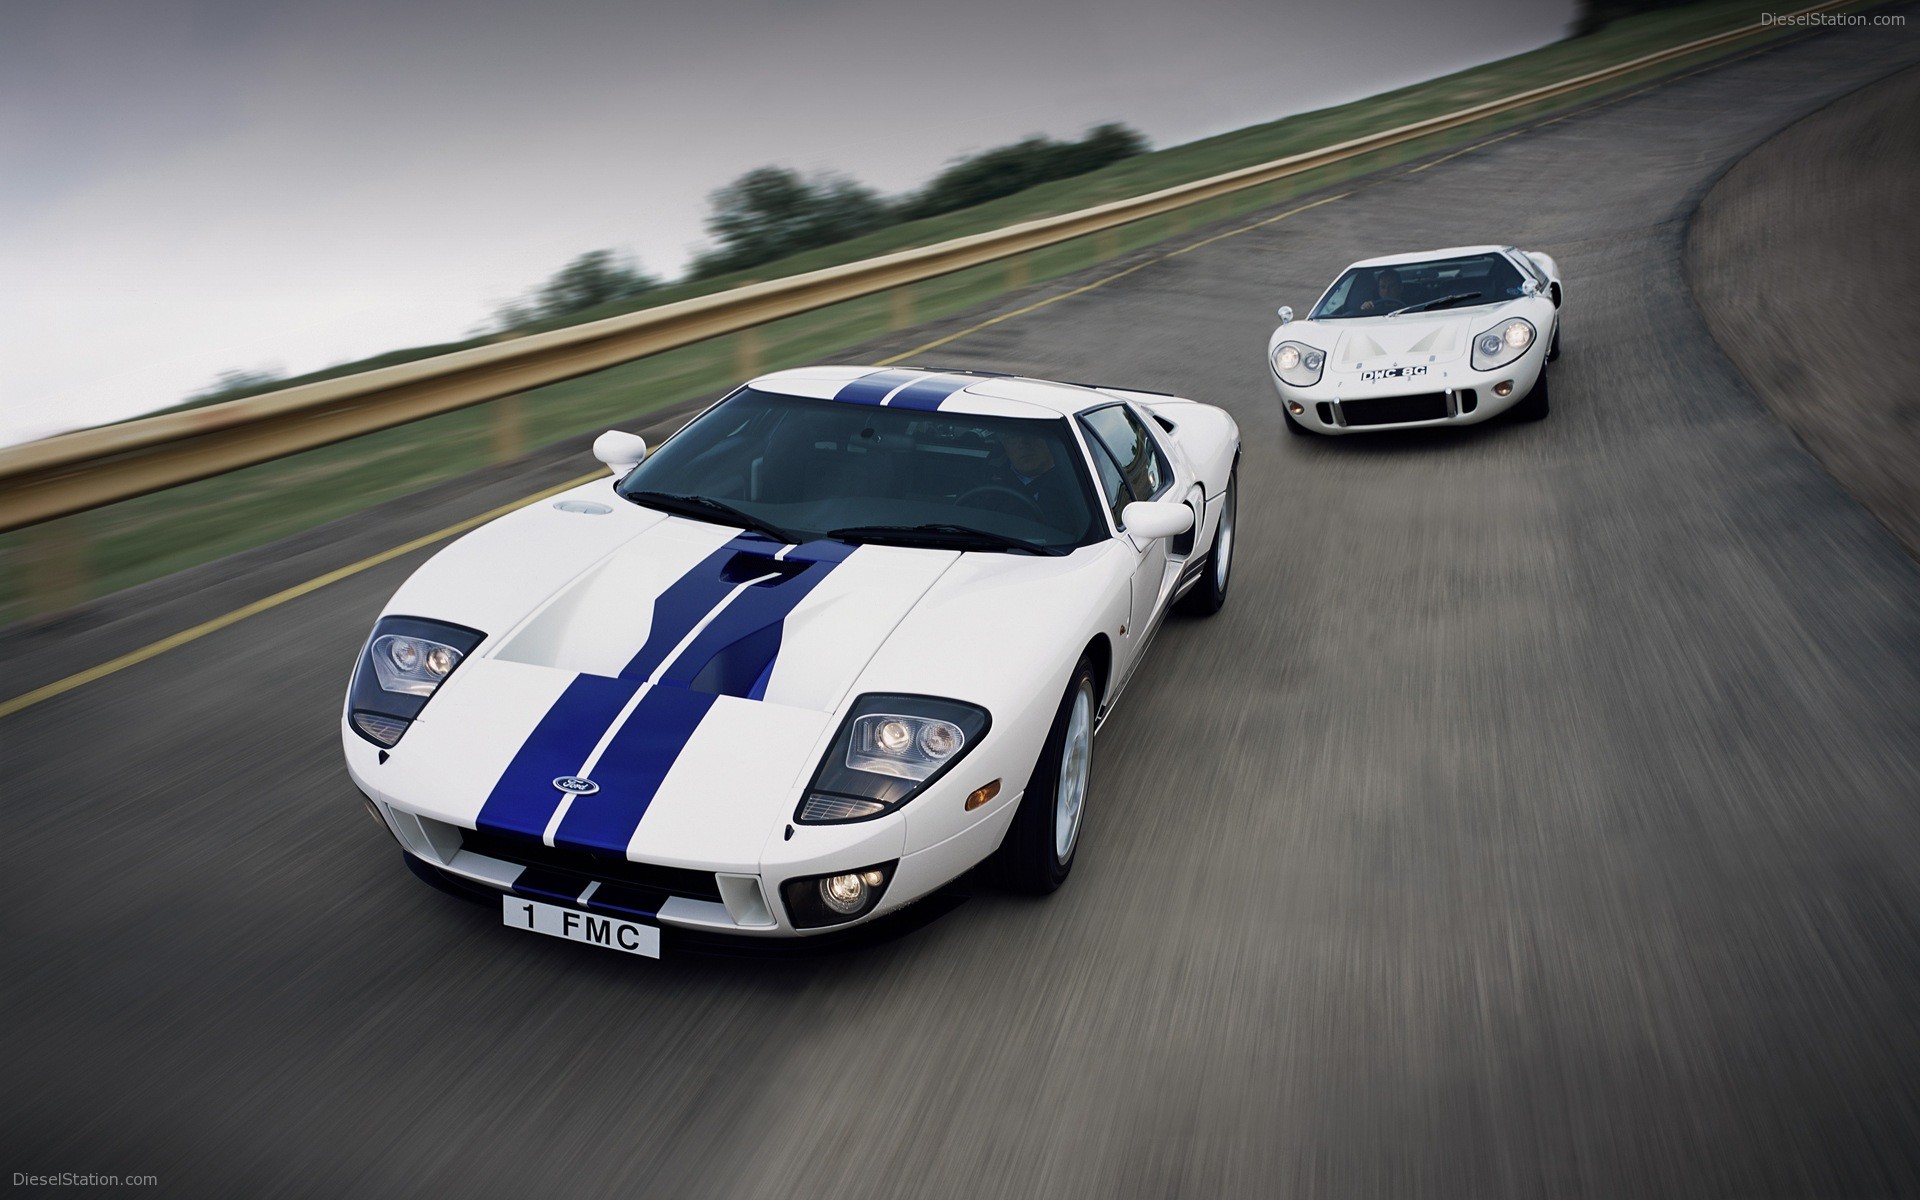 Gt Dieselstation Ford Gt40 Widescreen Wallpaper Car Pictures